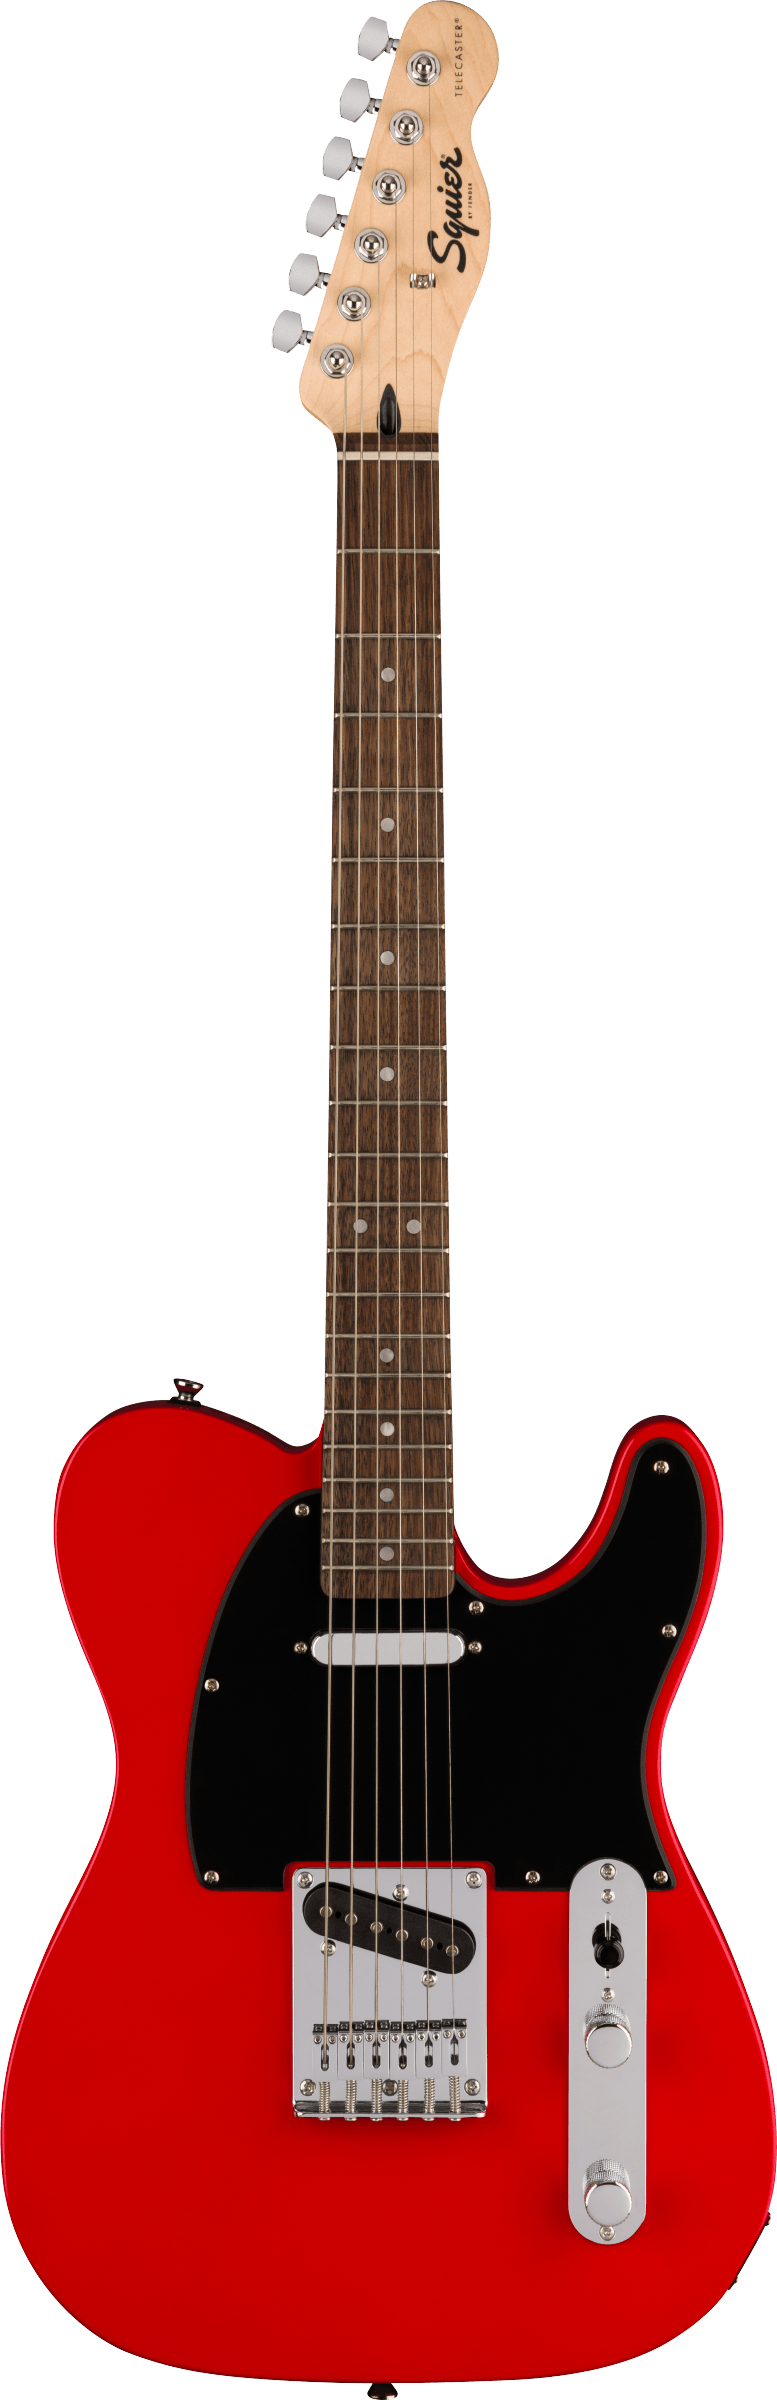 Squier Sonic Telecaster in Torino Red